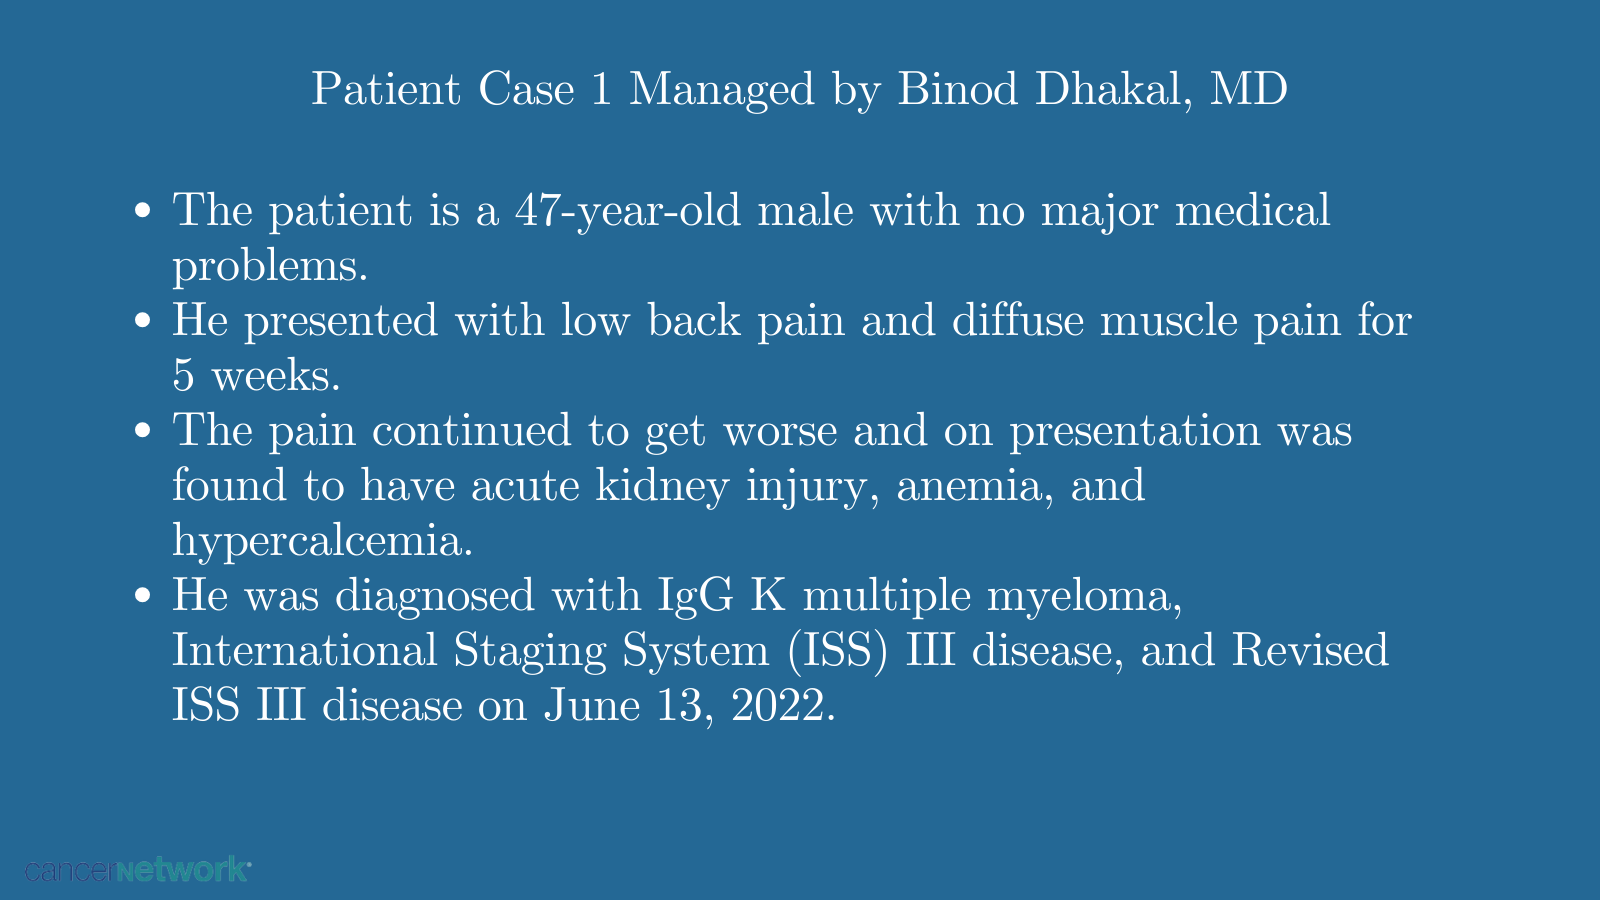 Patient Case 1 Managed by Binod Dhakal, MD